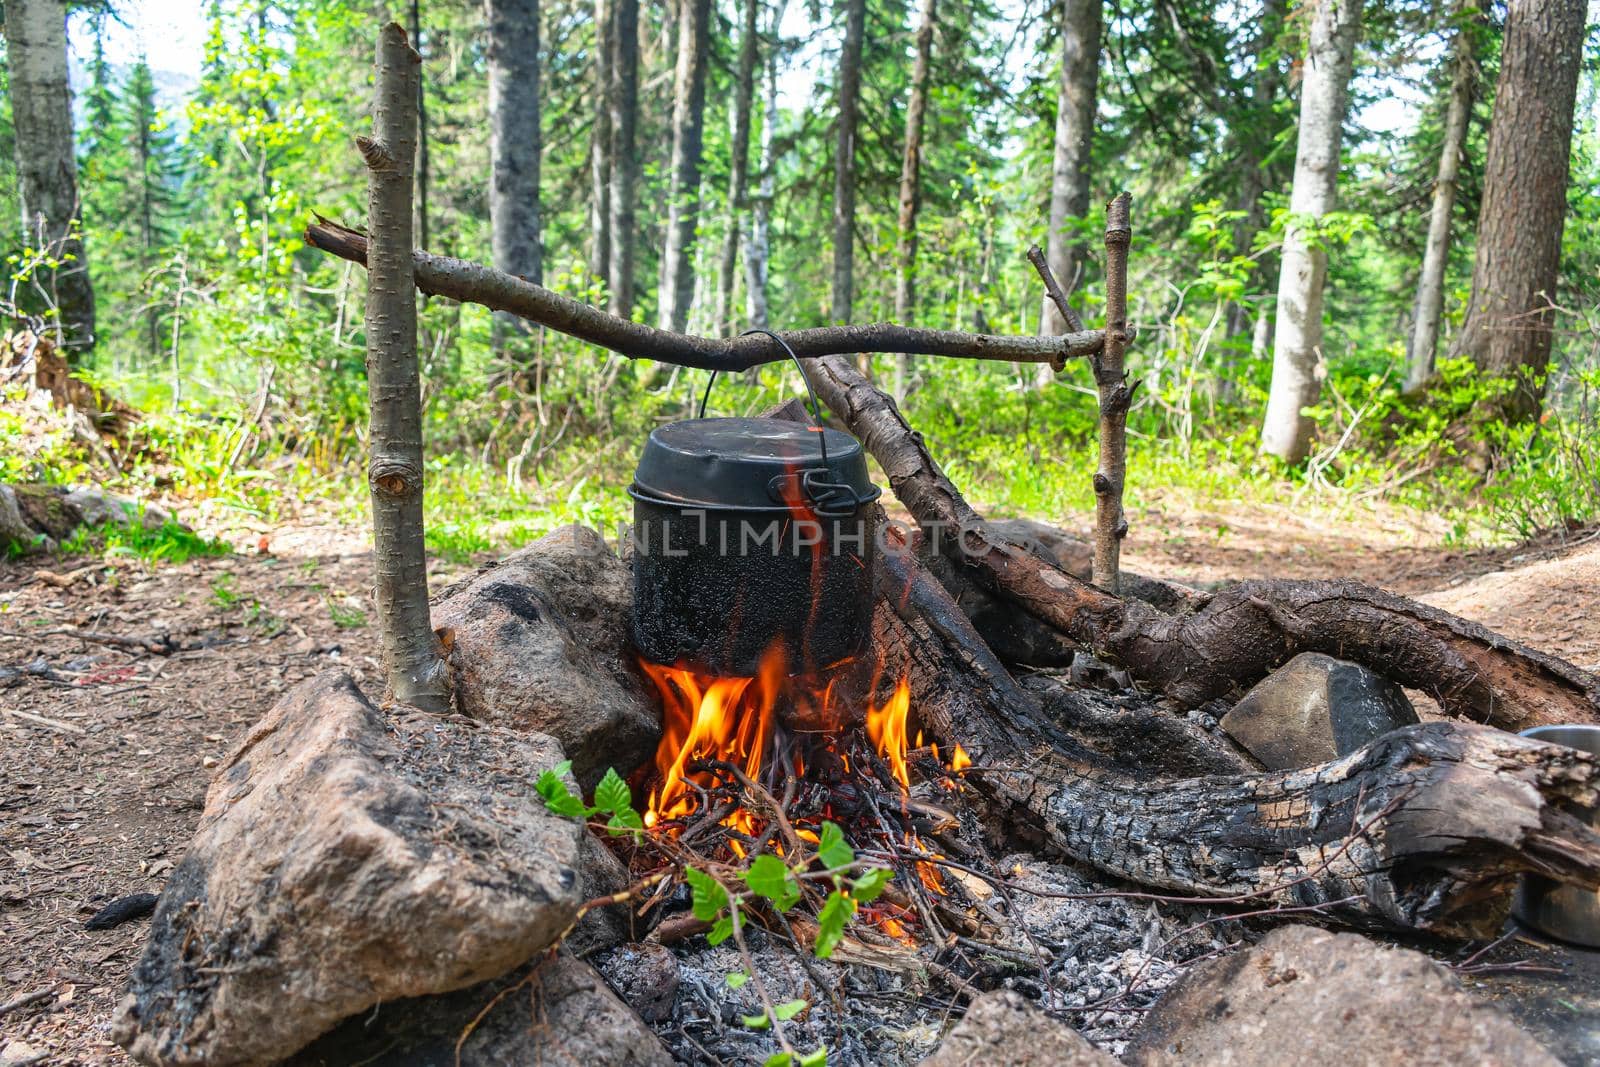 Cooking in a pot over a campfire in the forest during summer hiking in nature